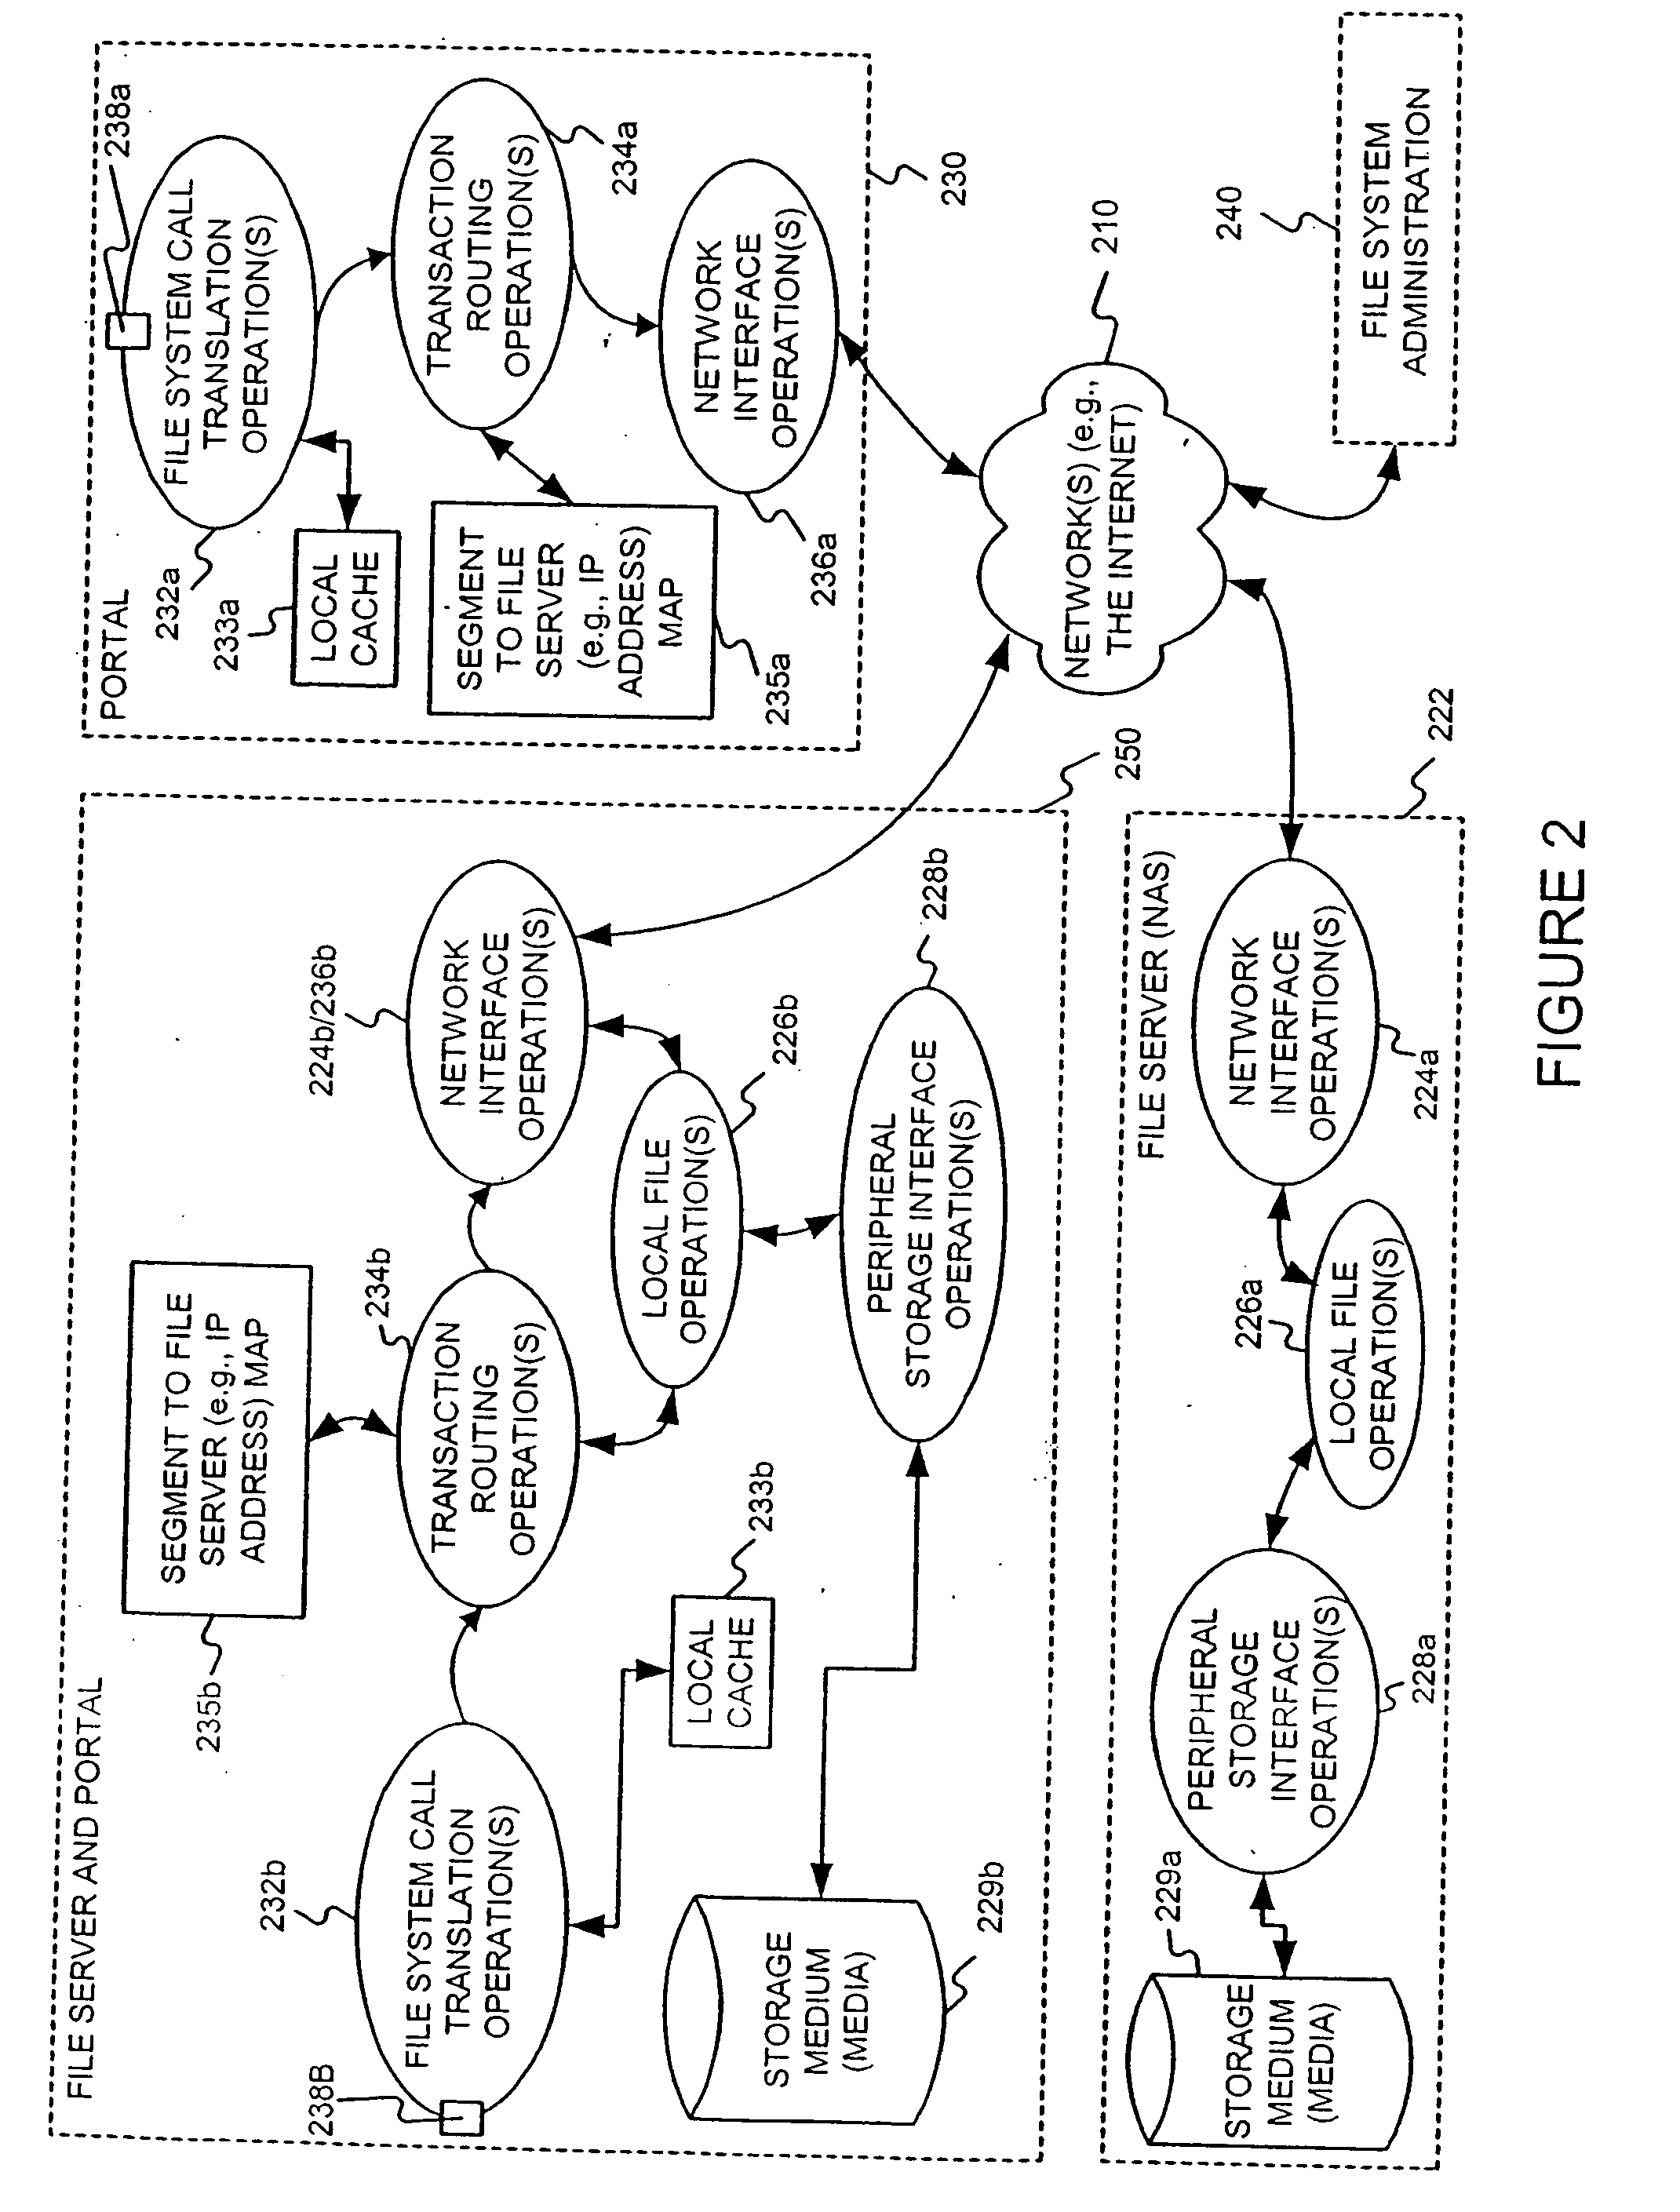 Migration of control in a distributed segmented file system